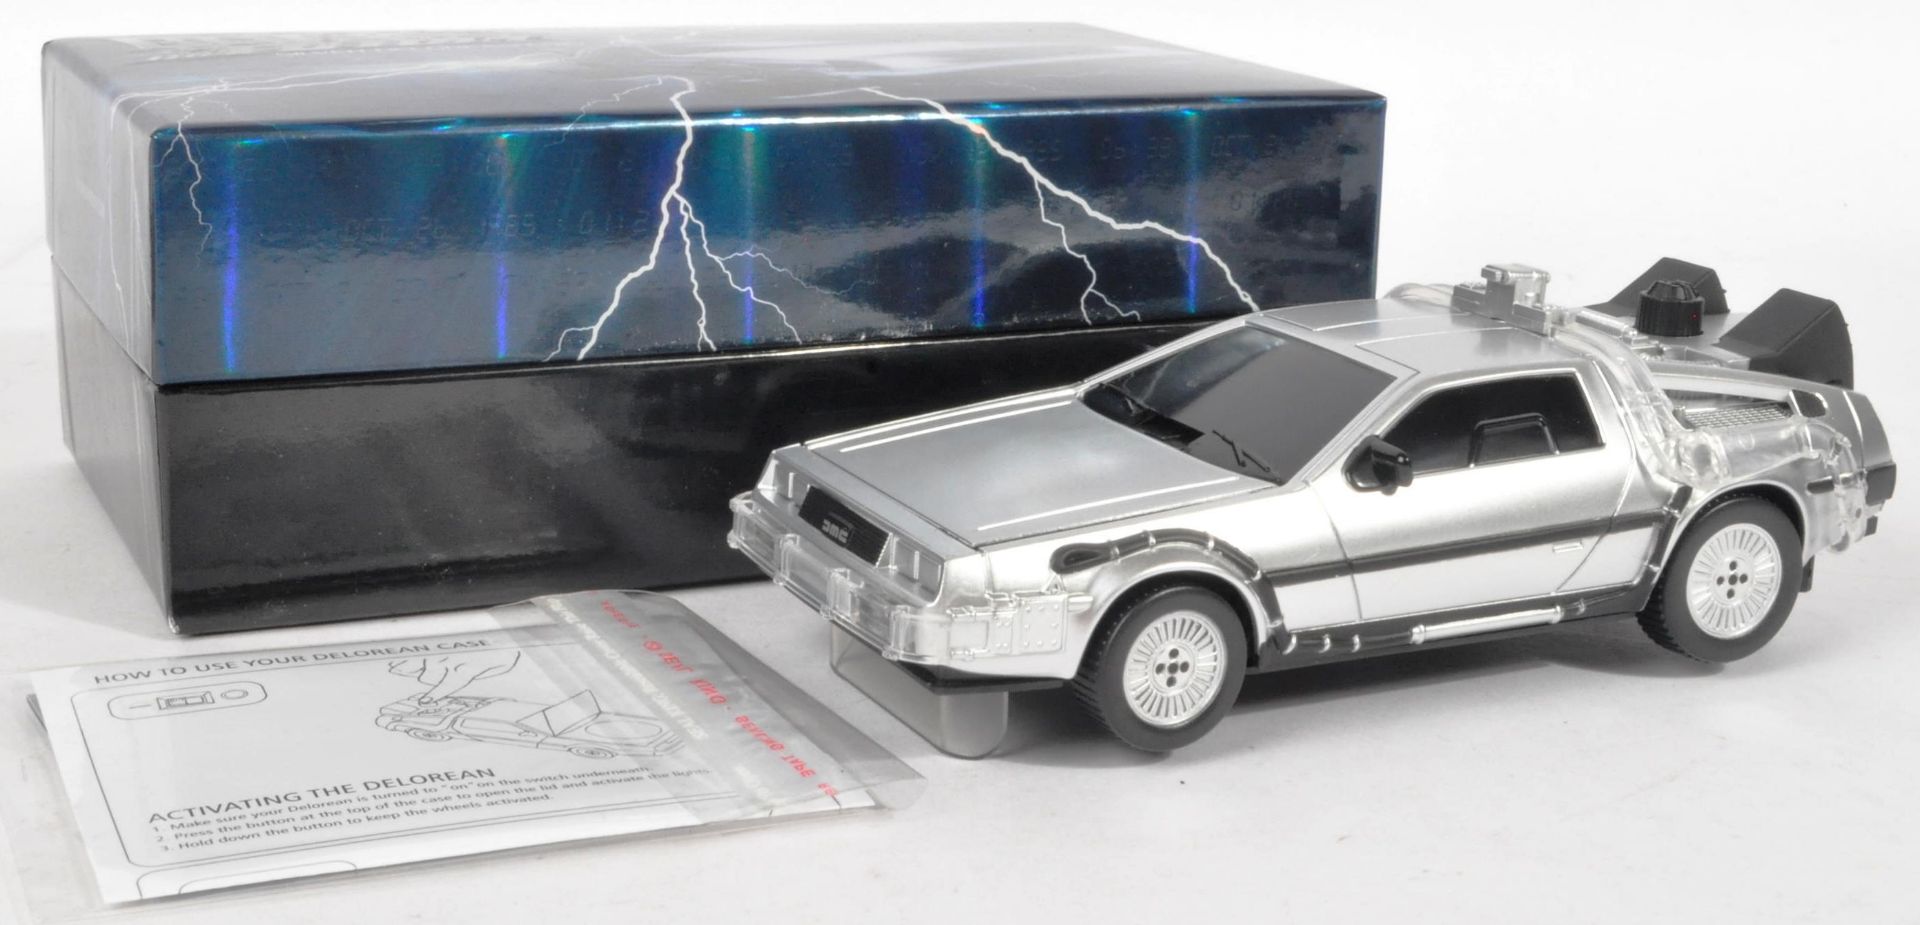 BACK TO THE FUTURE - 2015 PERTH MINT 1OZ SILVER PROOF COIN PRESENTATION